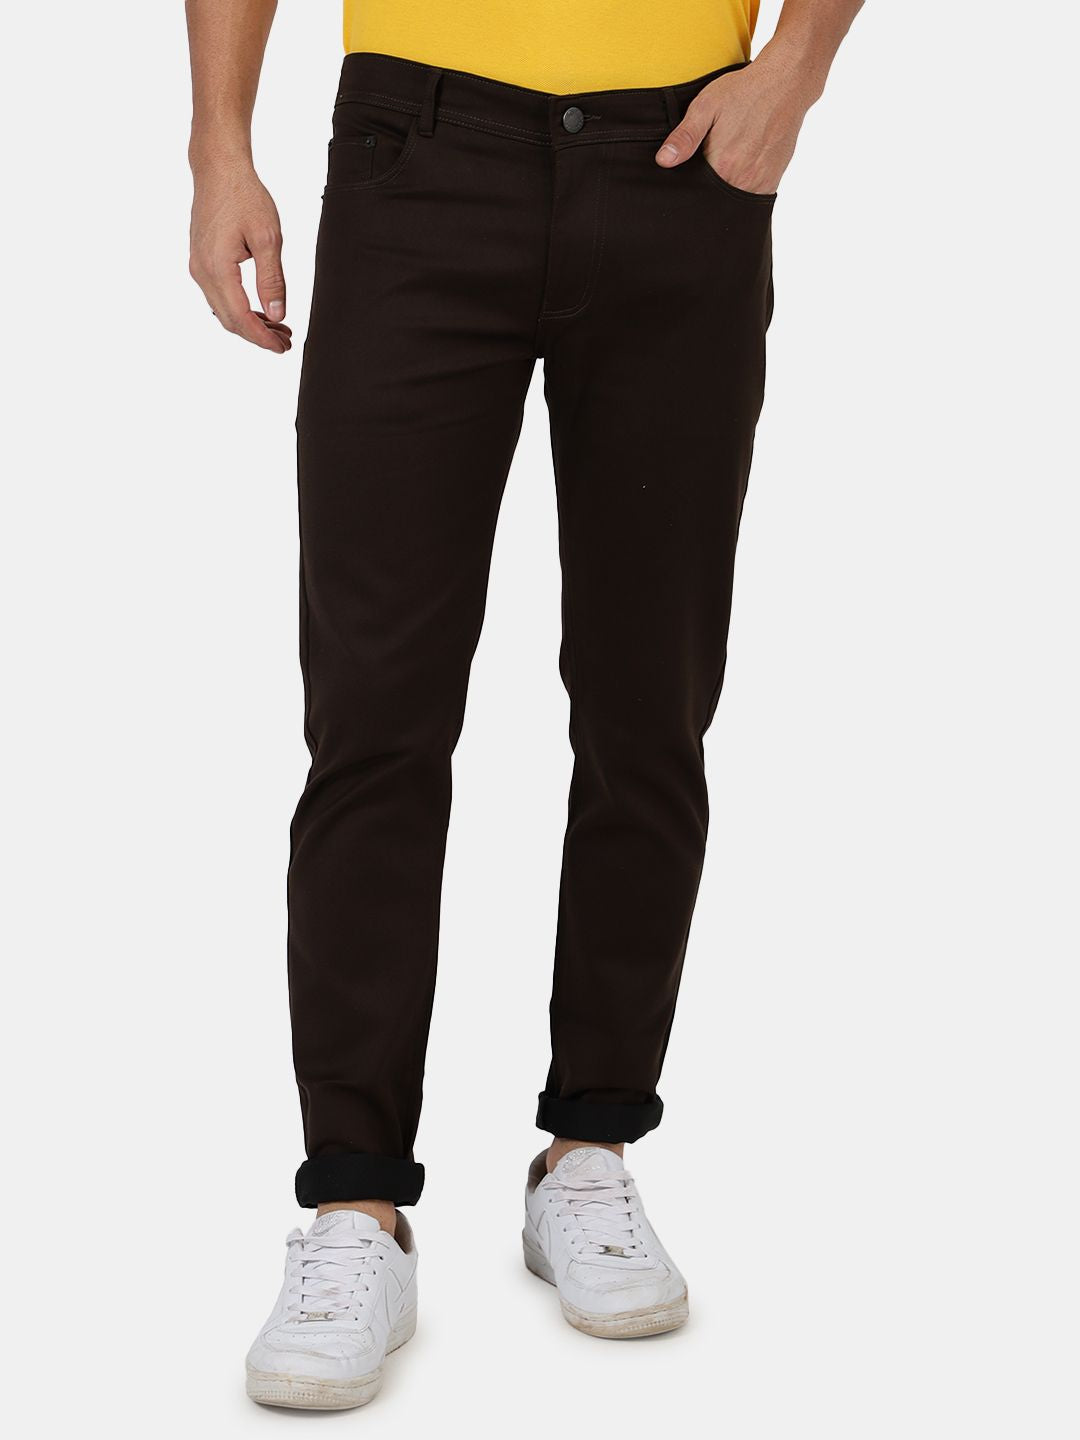 Slim fit flat front trouser_Brown